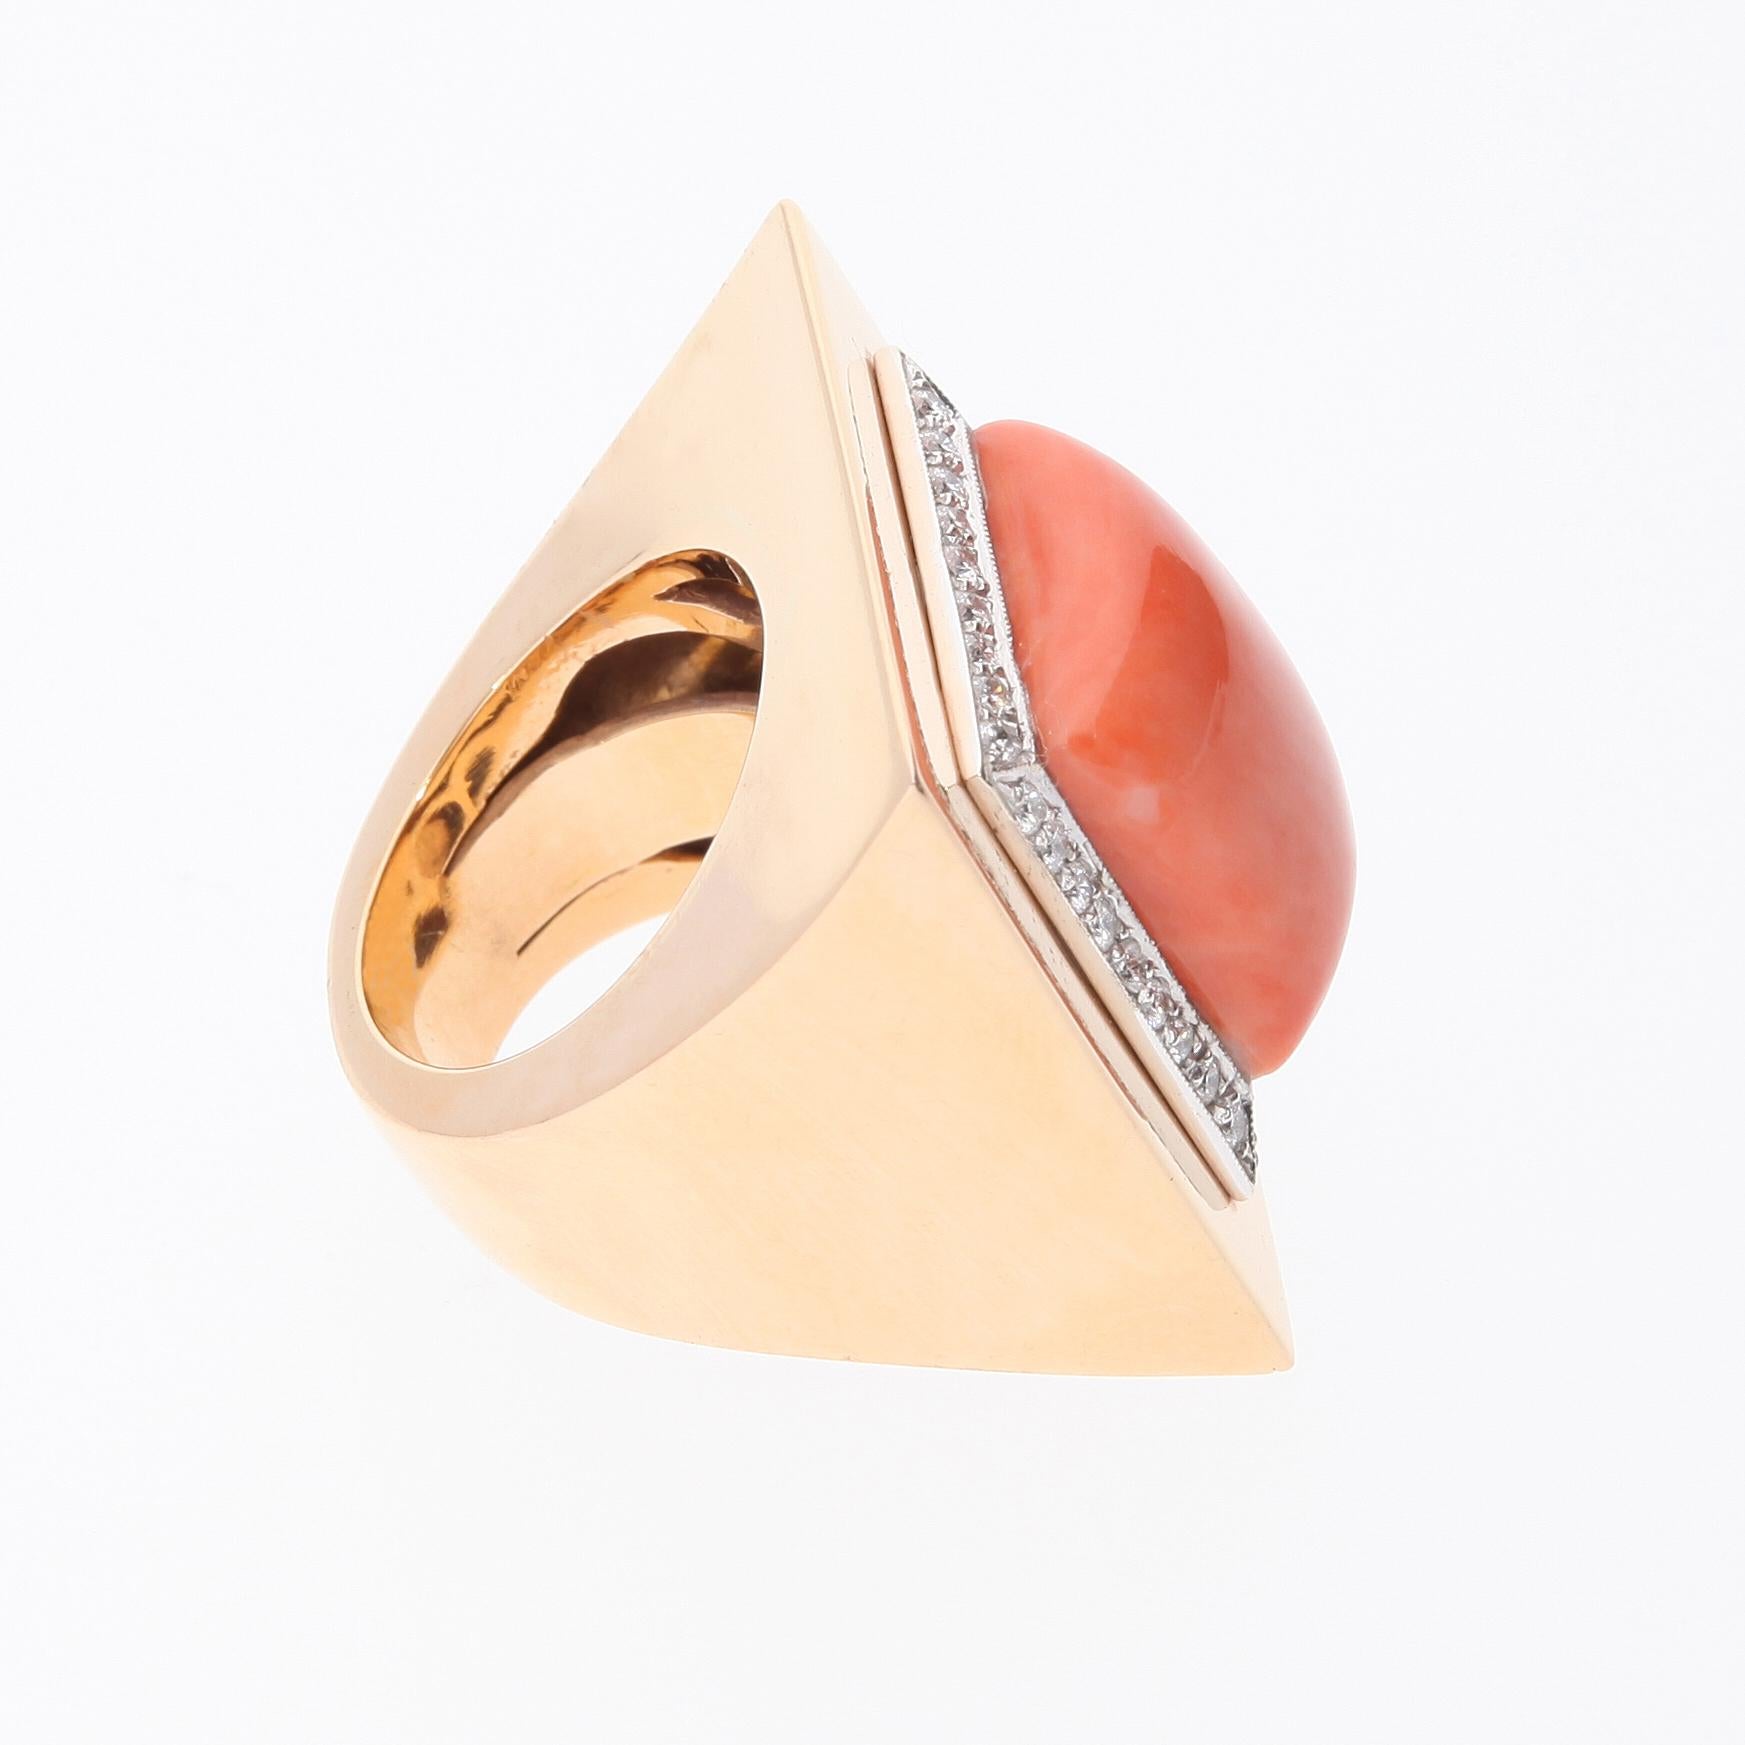 Contemporary Salmon Coral Ring Surrounded by 36 Diamonds. 18 Kt Rose Gold. Handmade in Italy. For Sale